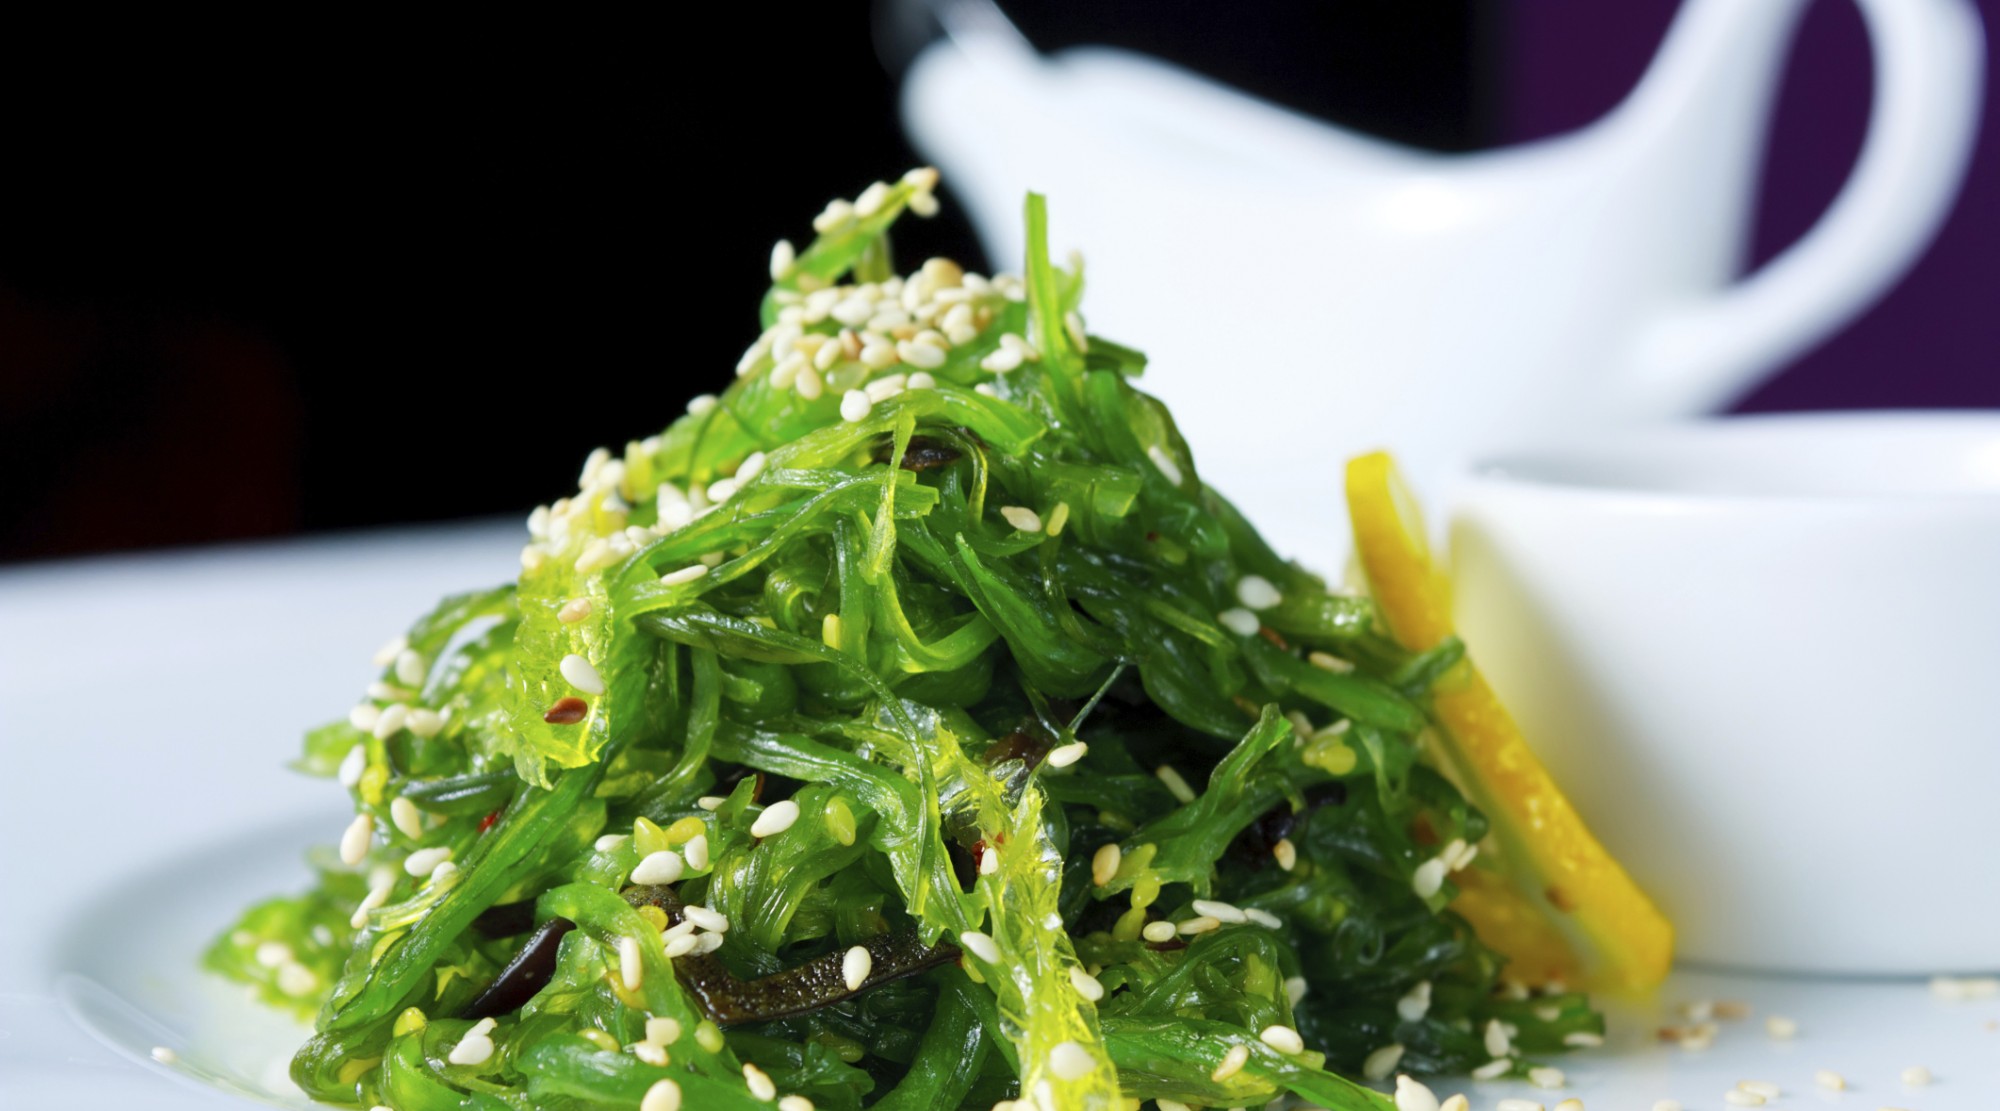 Benefits of seaweed extract for your health